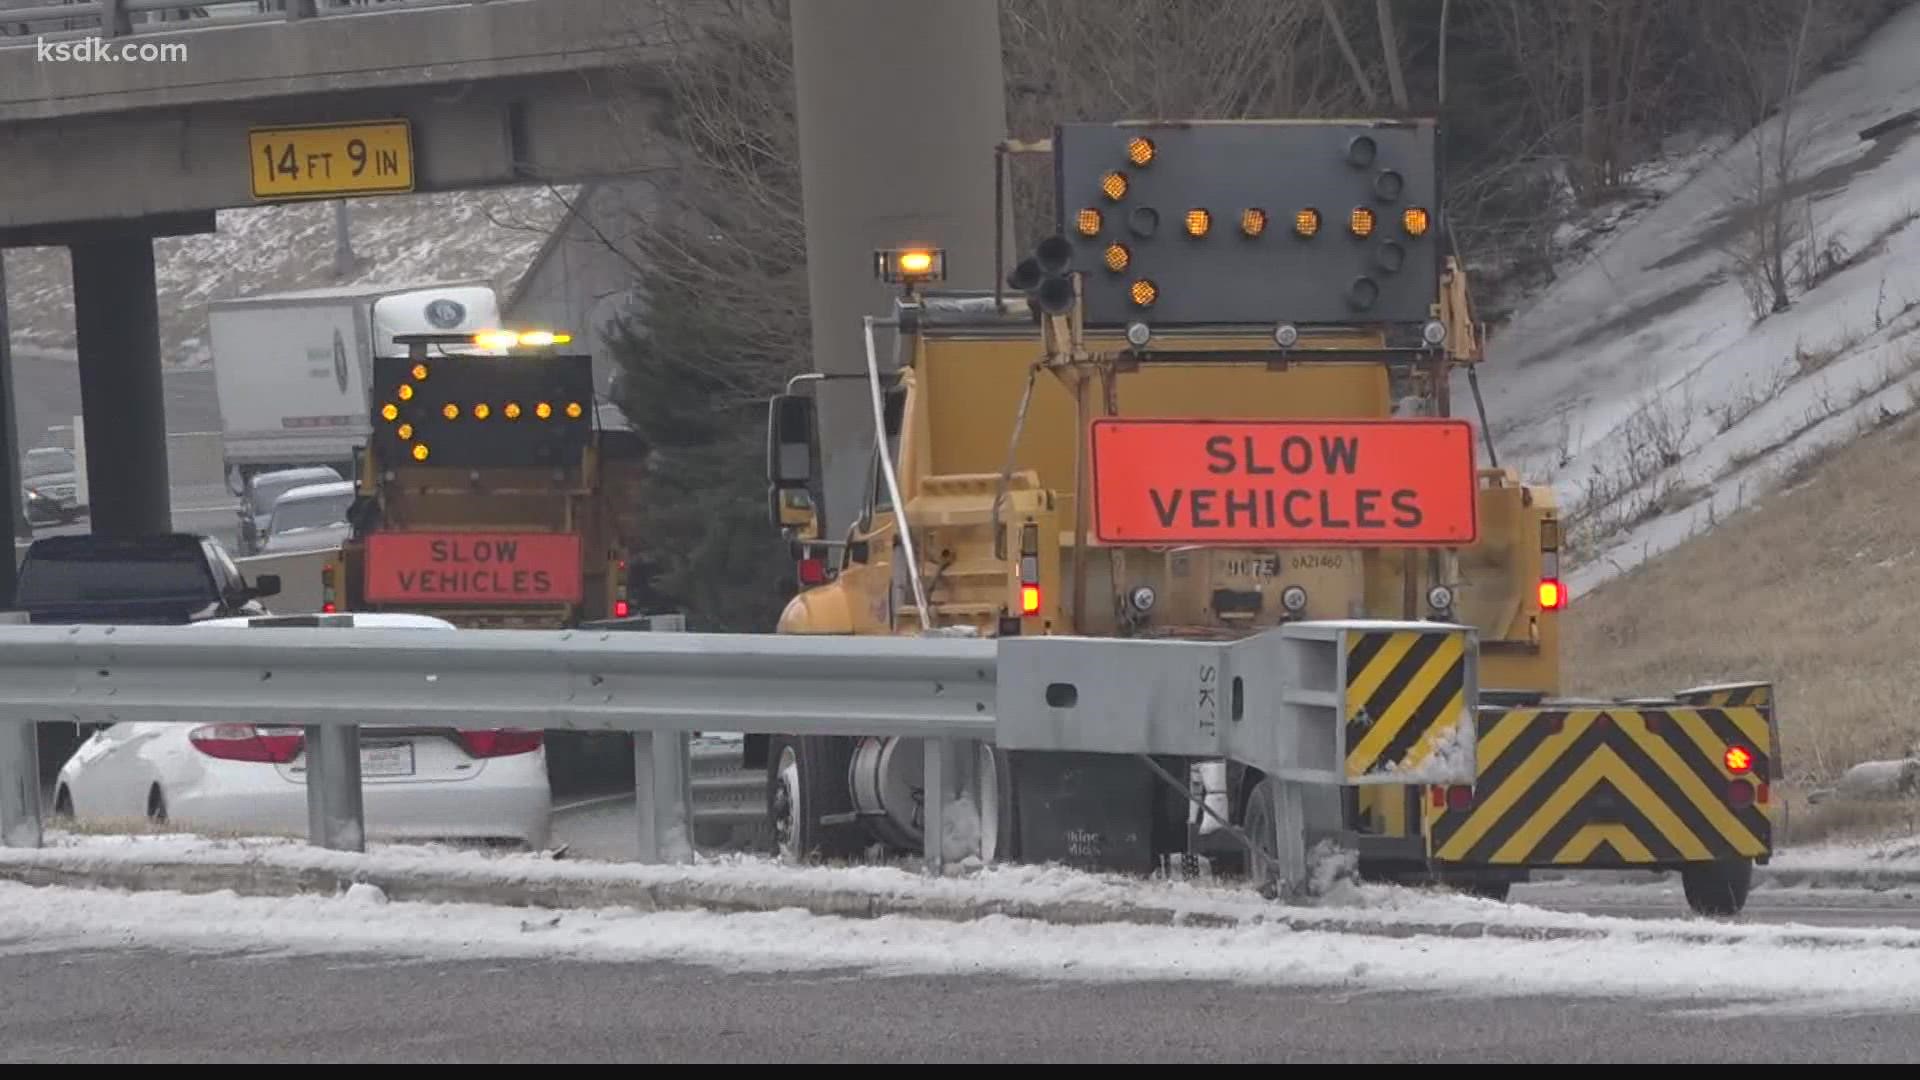 MoDOT officials said they don’t normally repair potholes on weekends, but the freeze-thaw cycle this season has made that necessary.